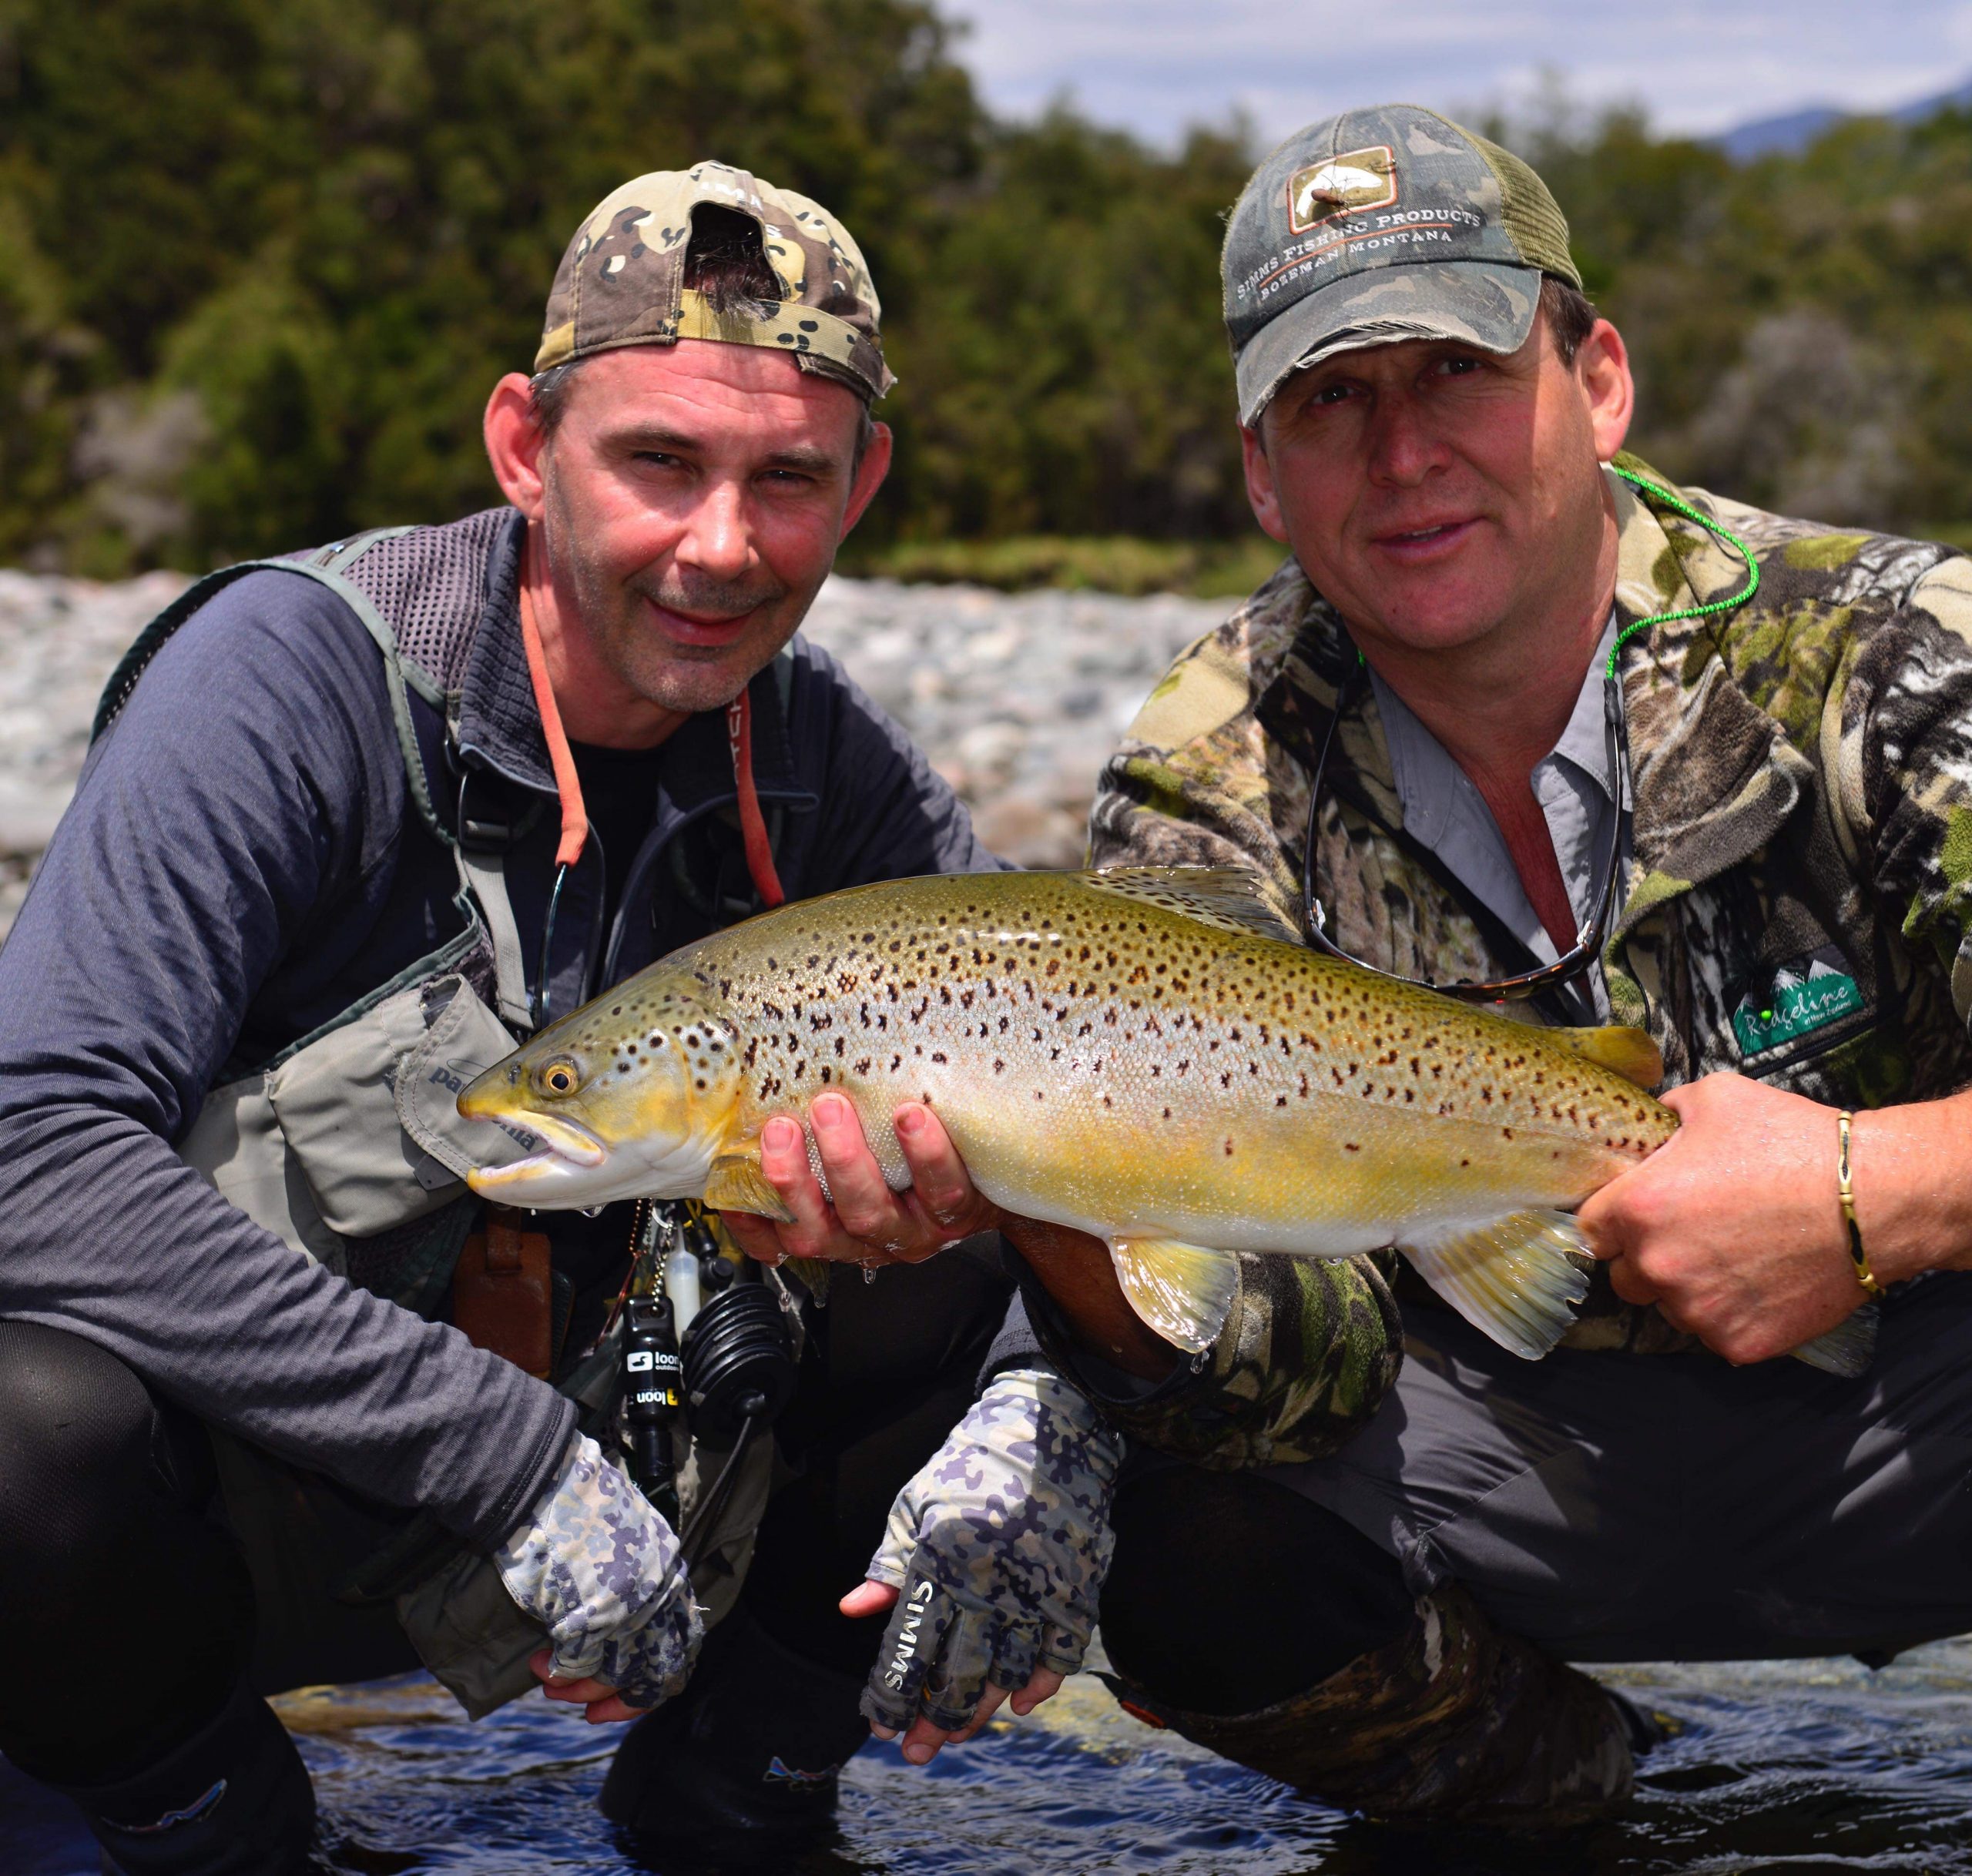 South Island New Zealand Brown trout with Bryan Wilson Reefton fishing guide